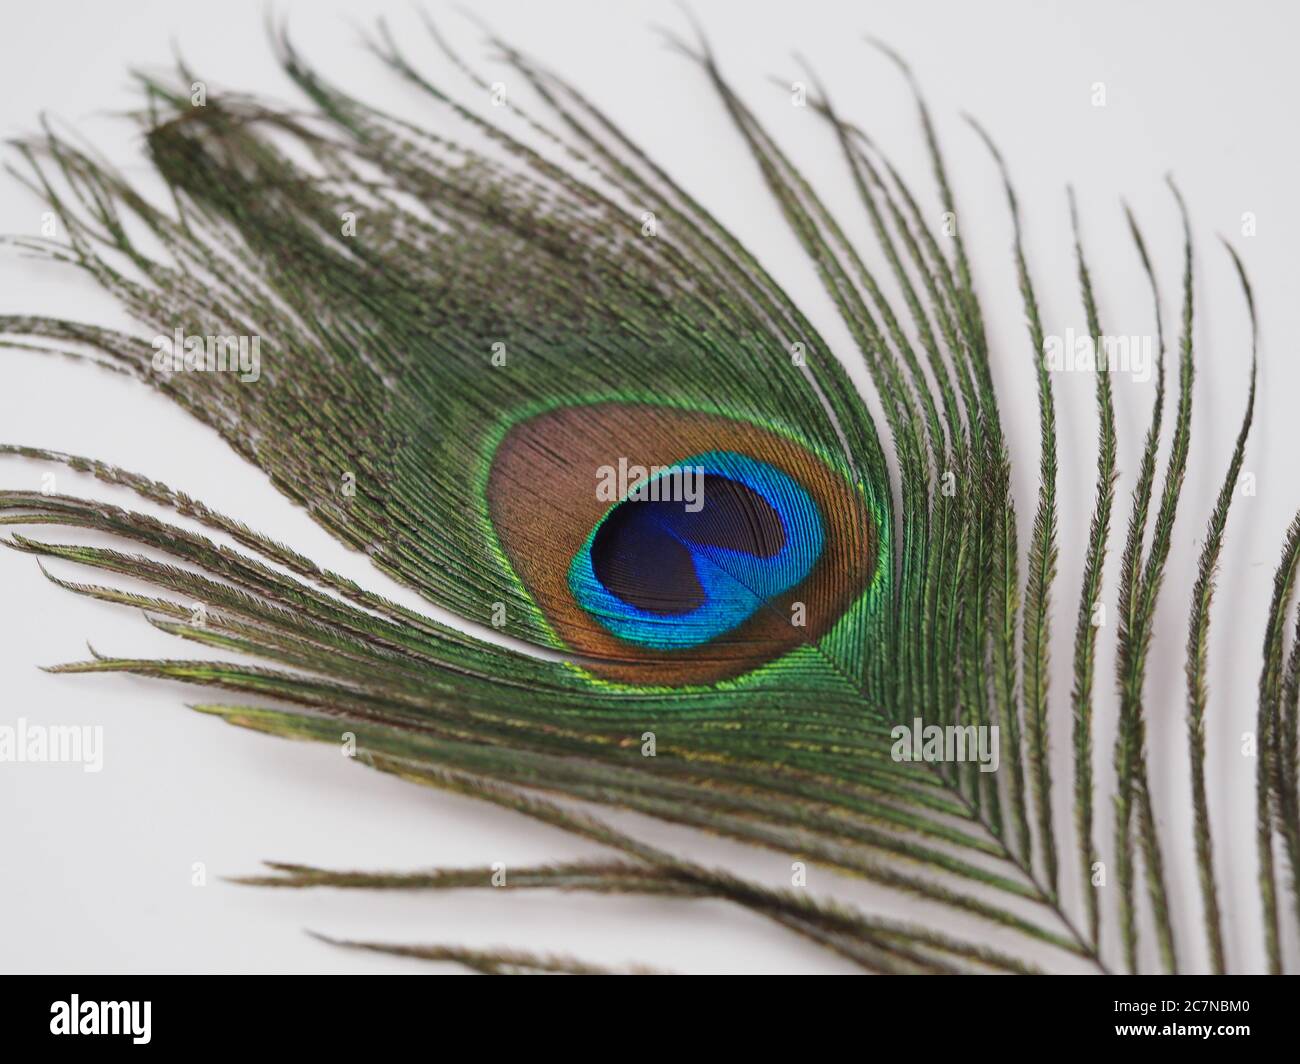 A Single Peacock Feather on a White Background Stock Photo